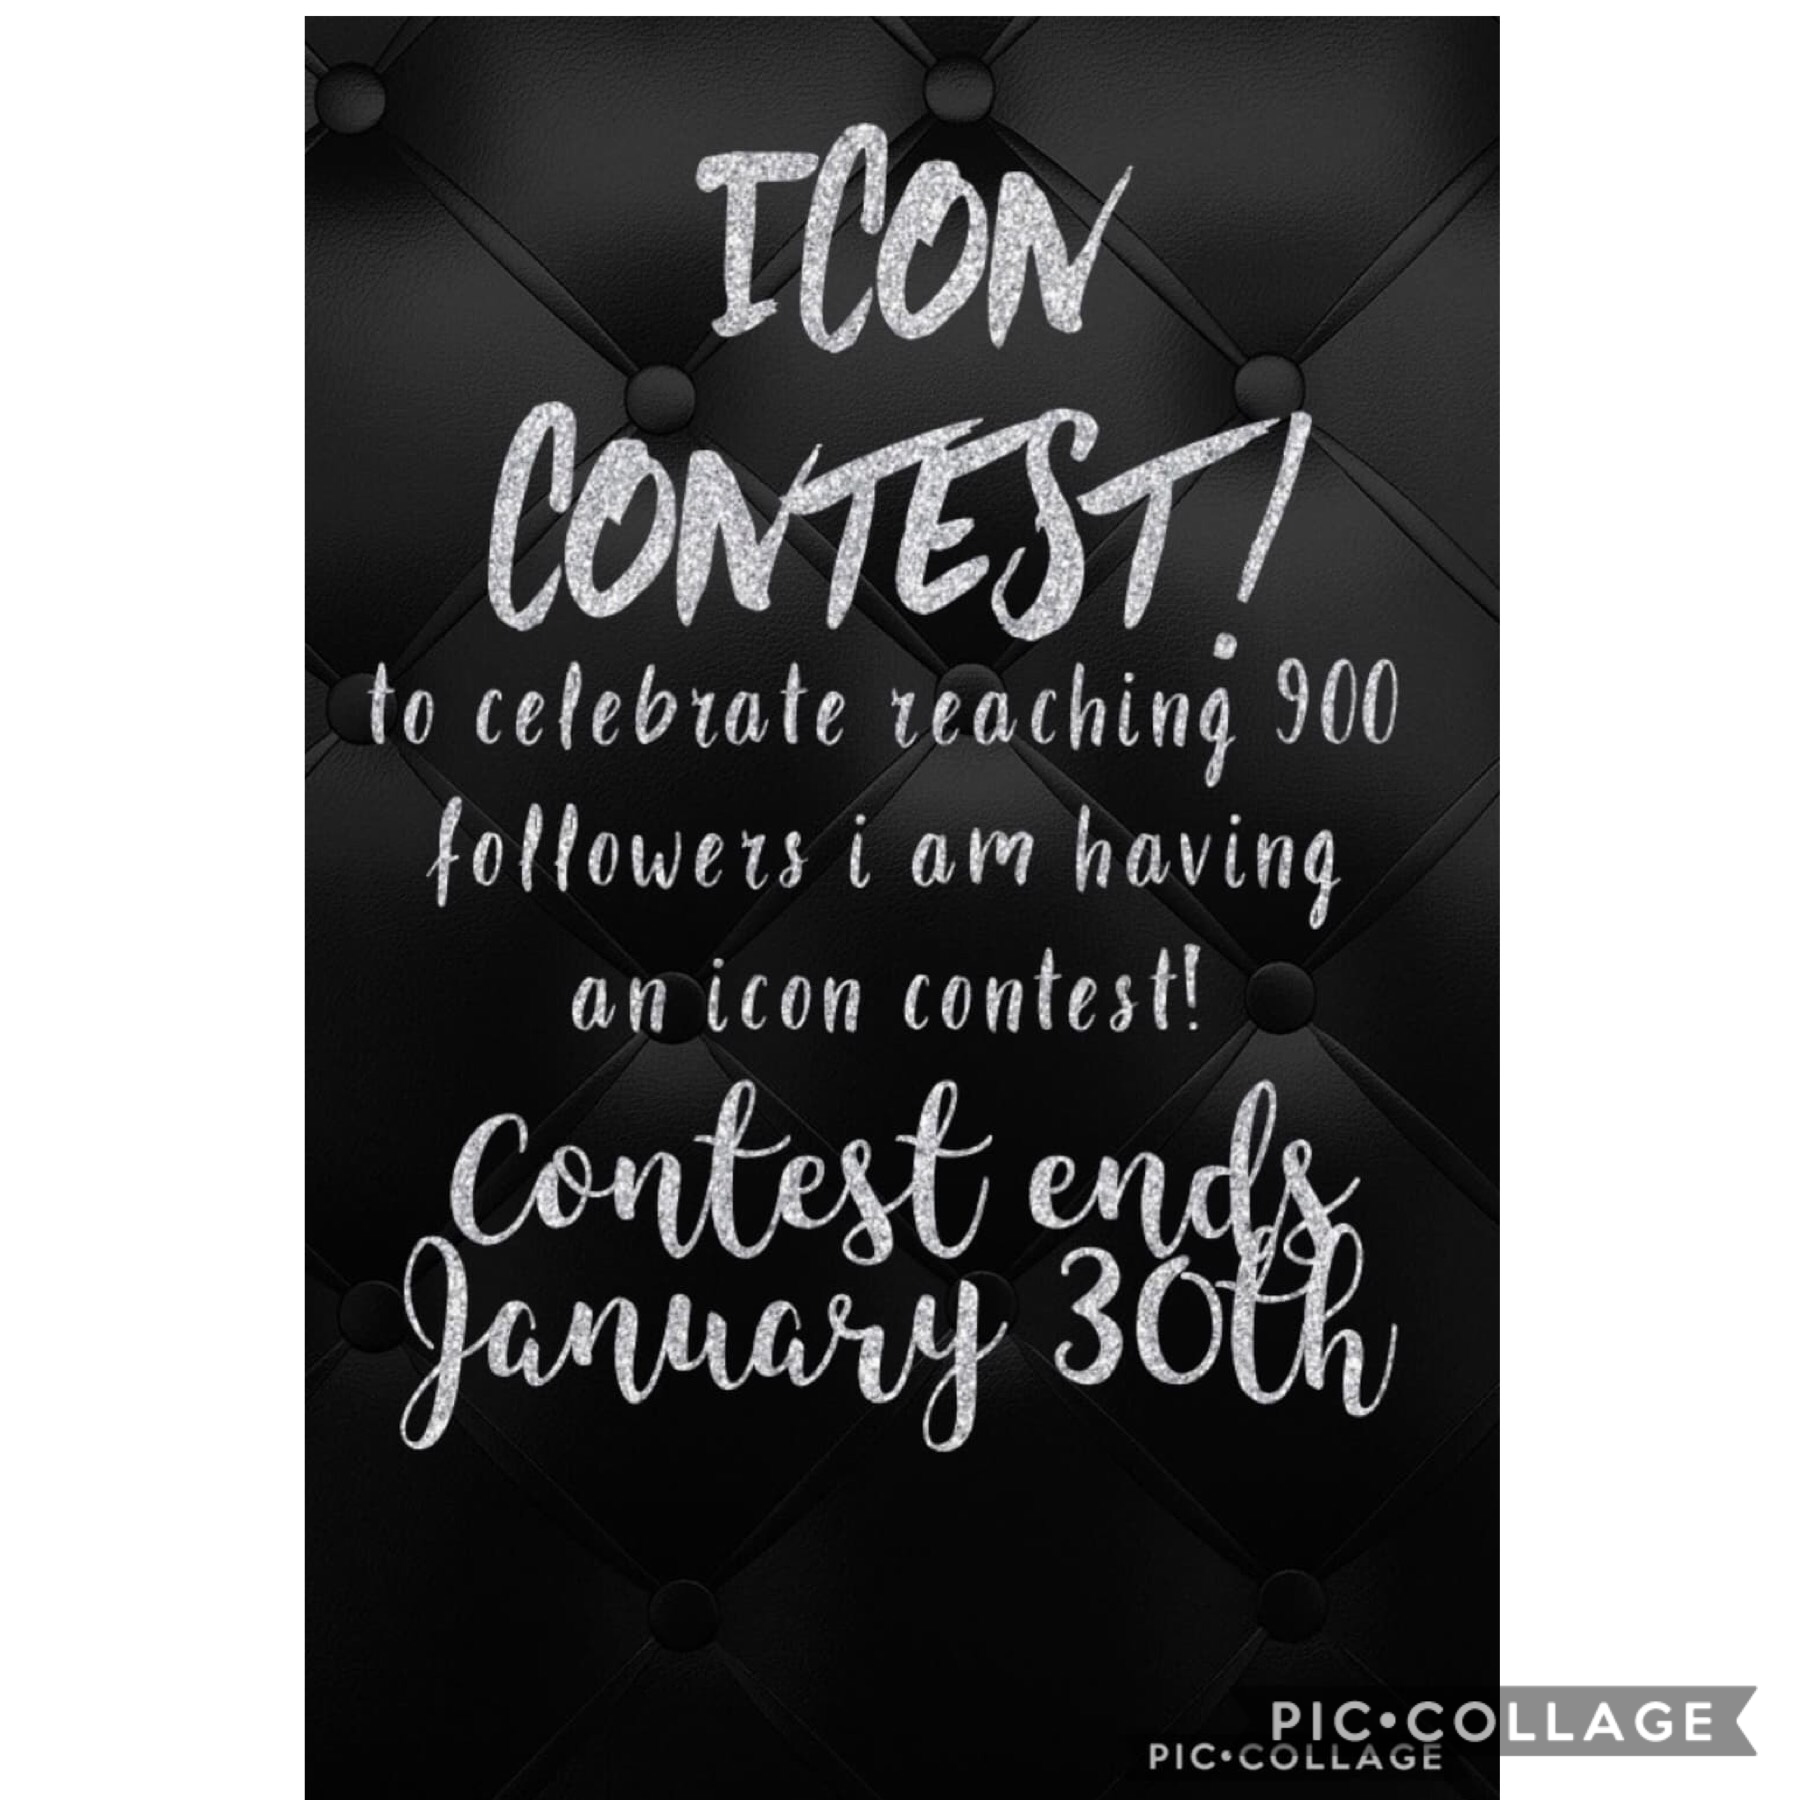 **NOT MY CONTEST*** Can u guys go enter Azelma’s icon contest please?? She will rly appreciate it!